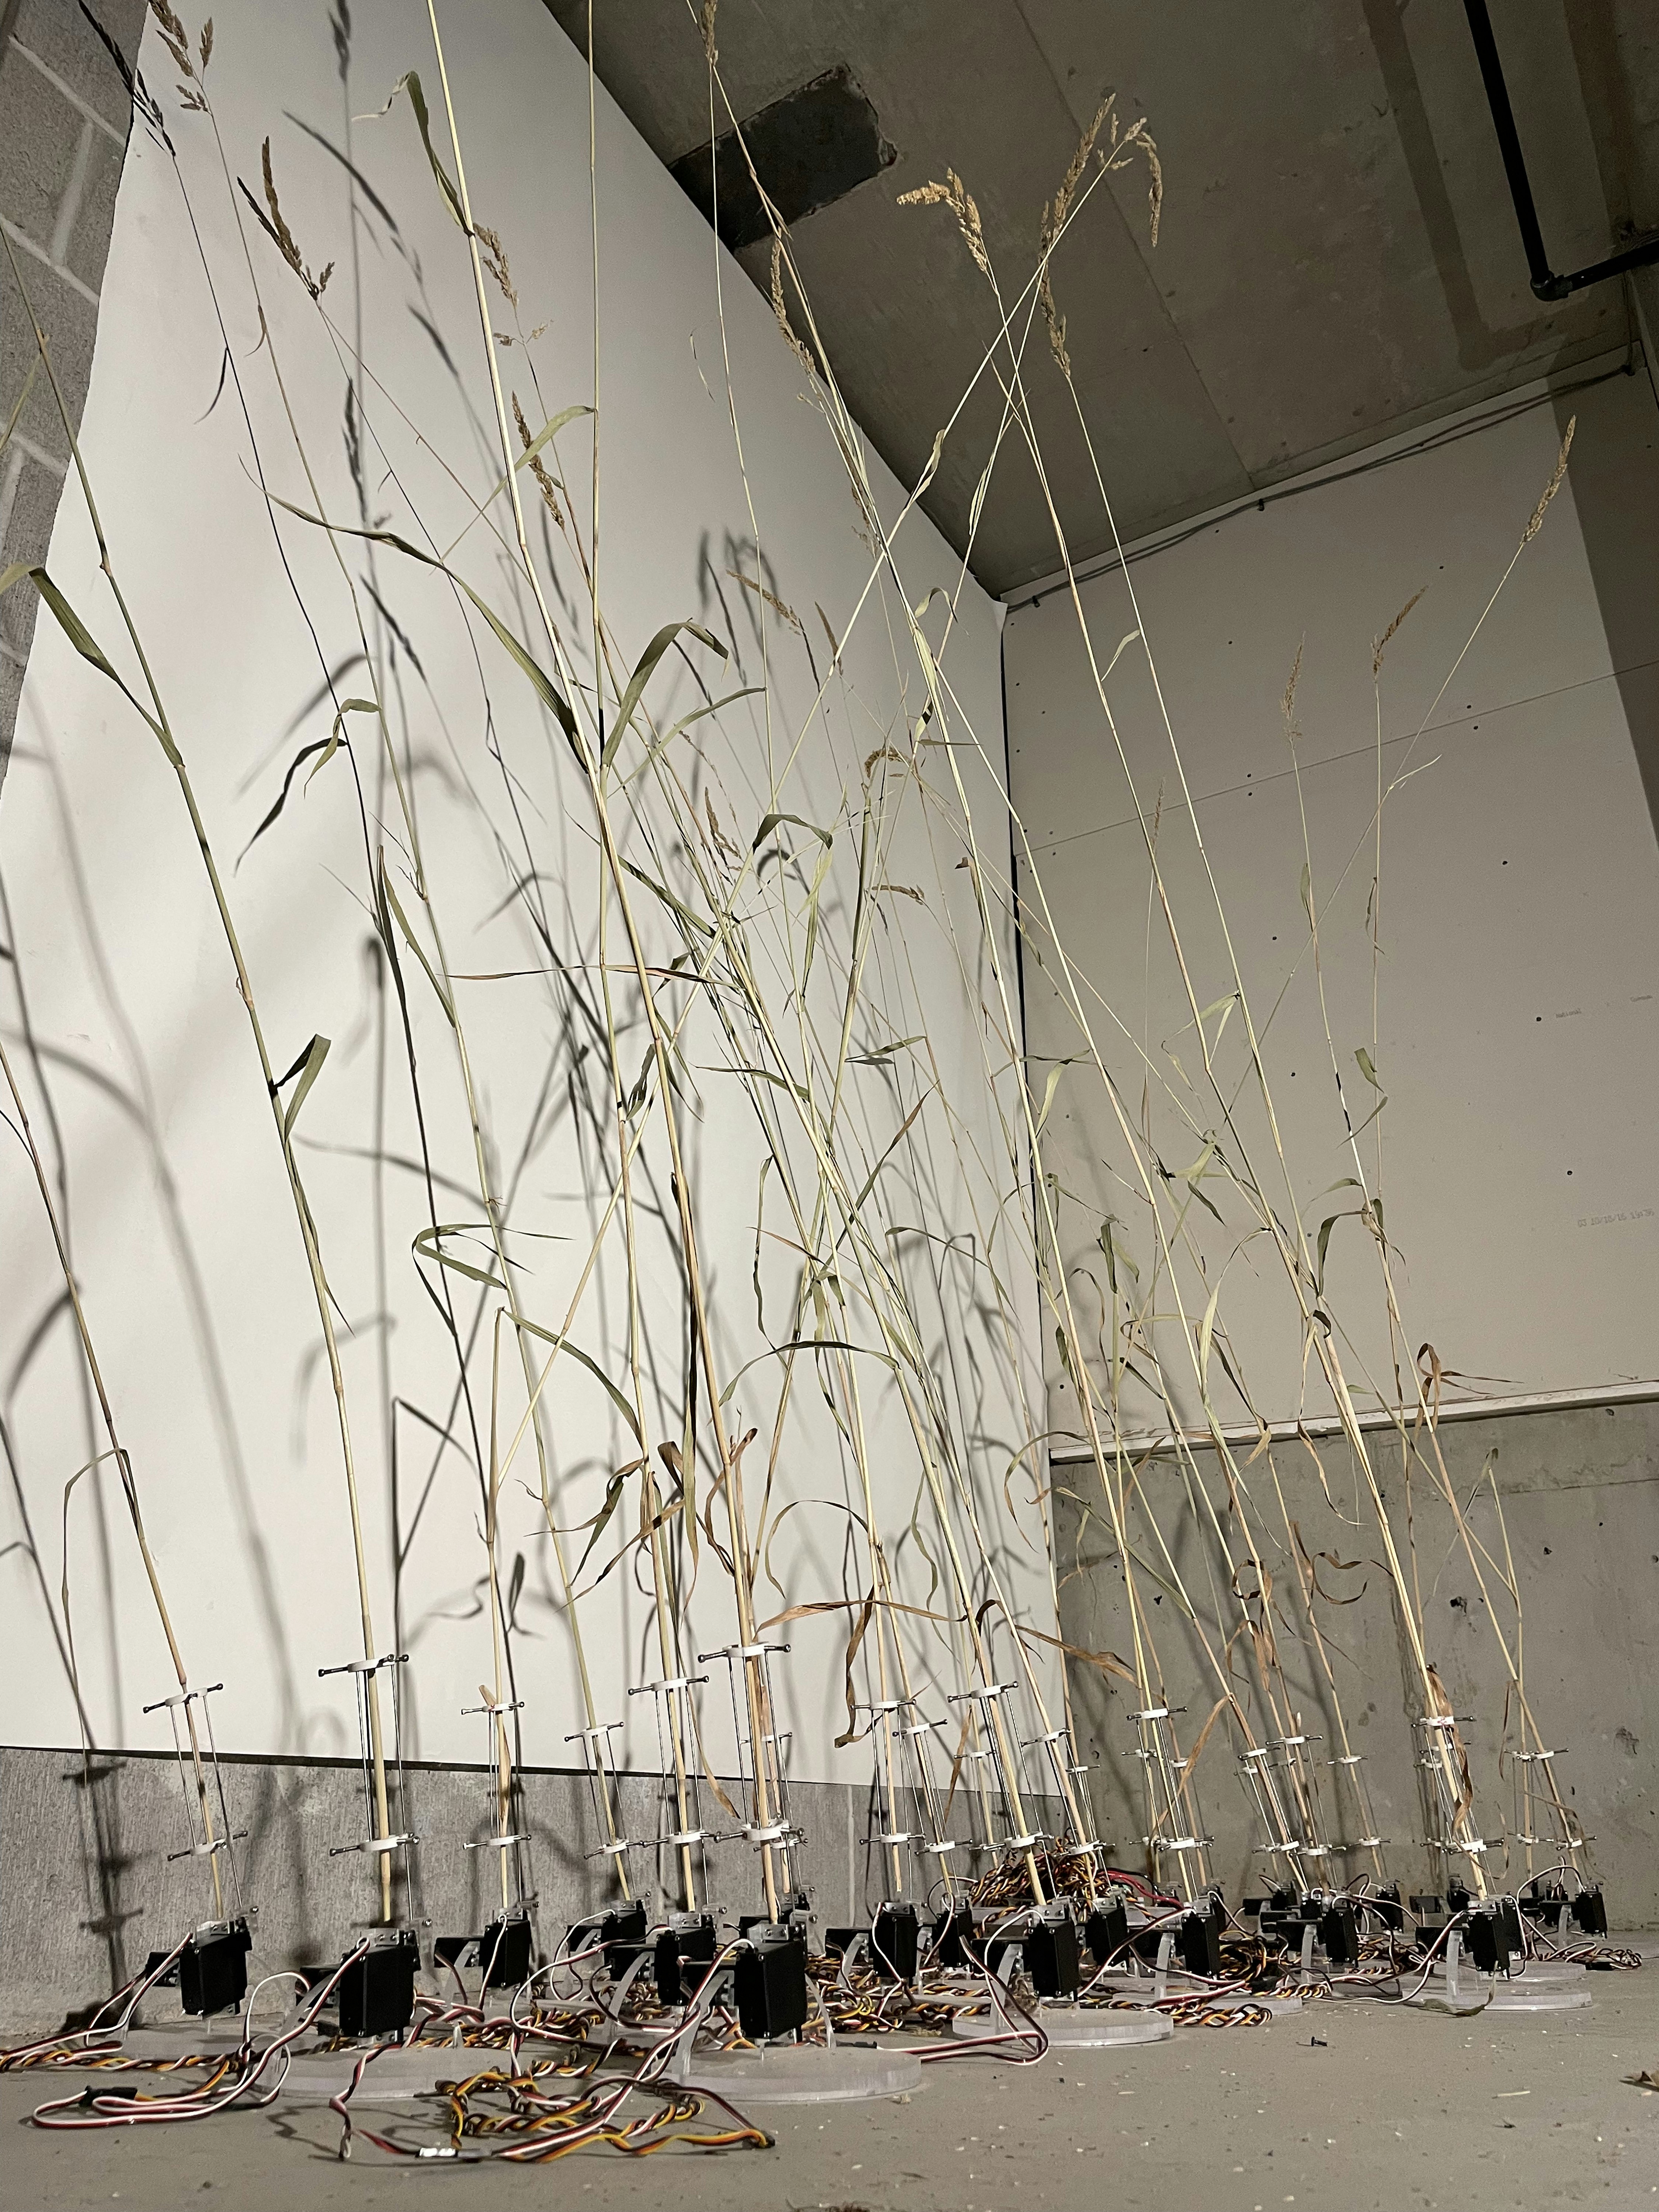 A color photograph of tall, potted tree saplings growing in a white walled room.